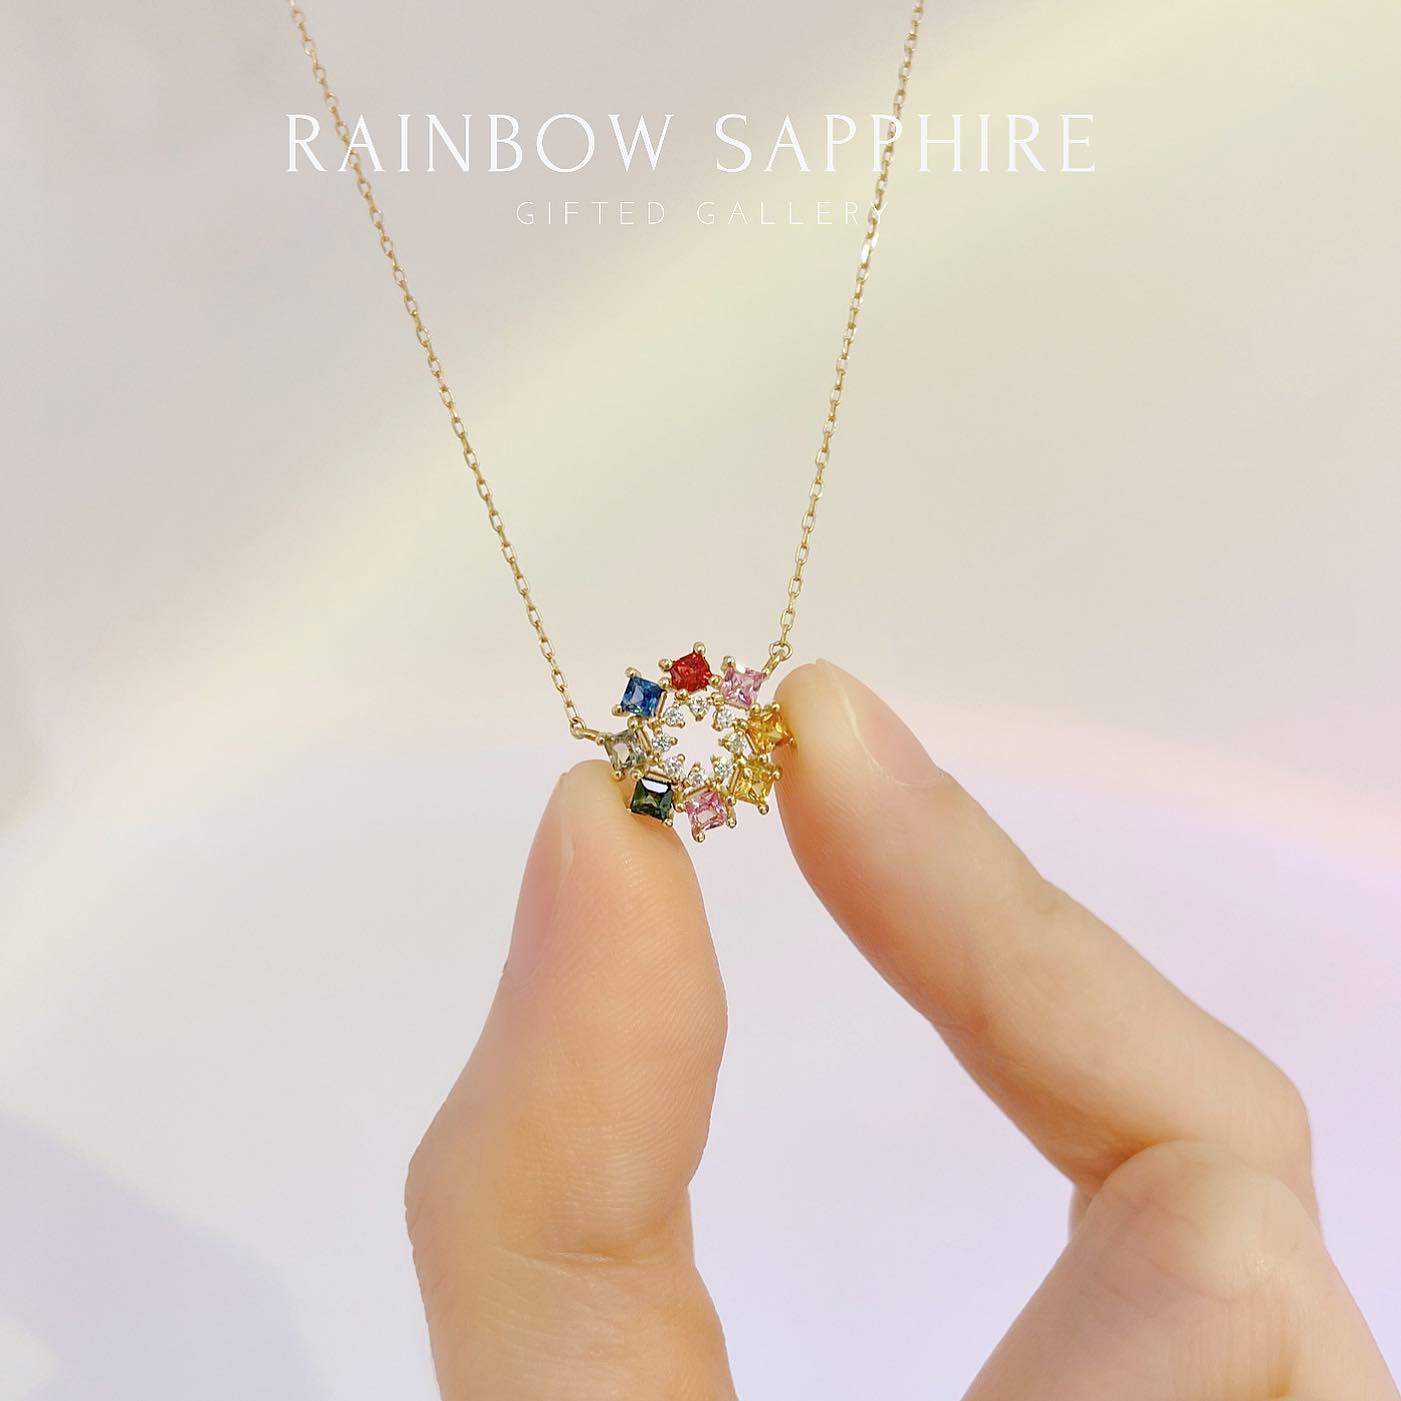 Rainbow Sapphire Necklace by Gifted Gallery